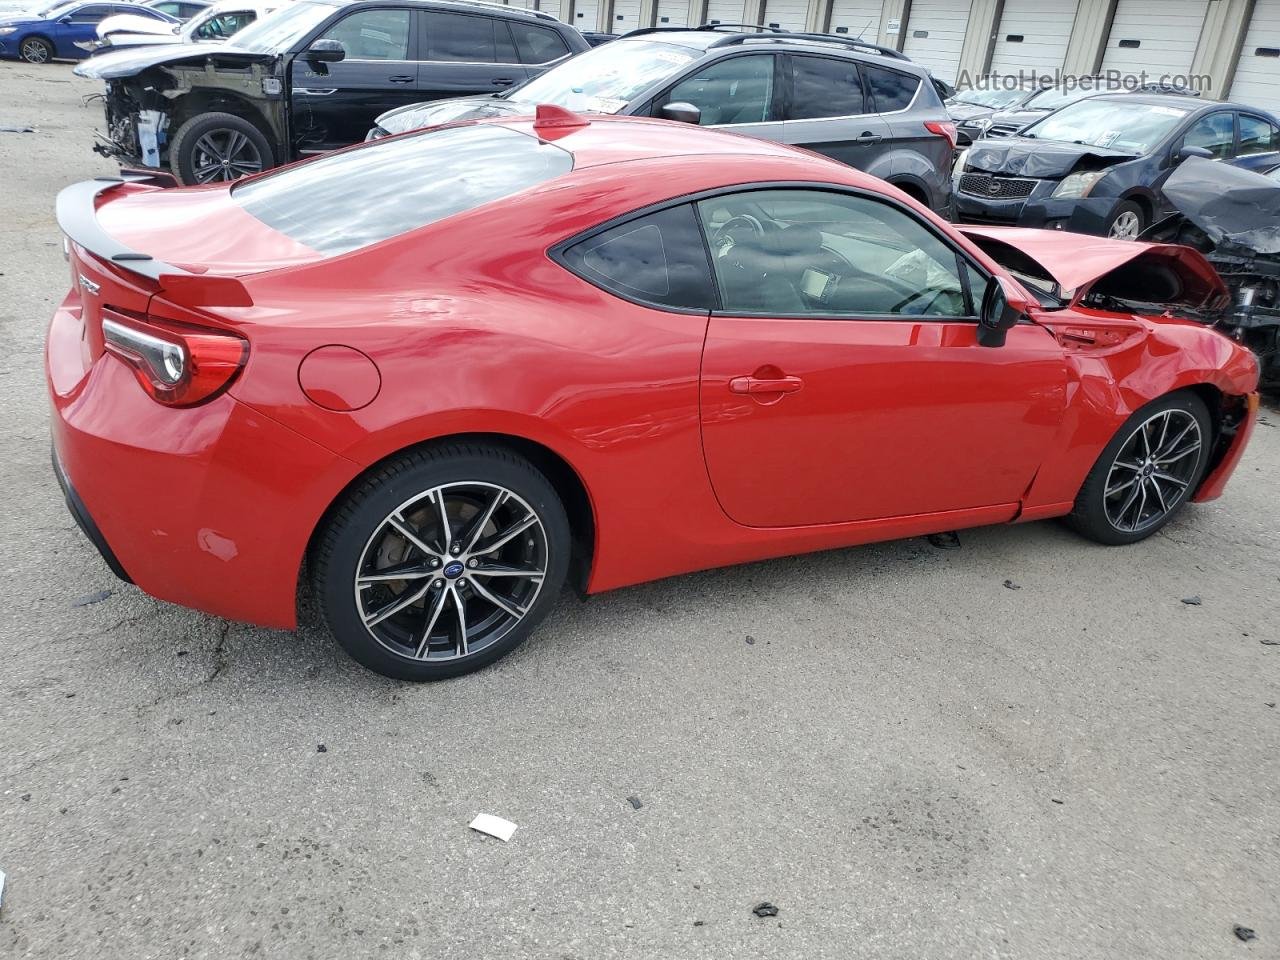 2017 Subaru Brz 2.0 Limited Red vin: JF1ZCAC18H9600660